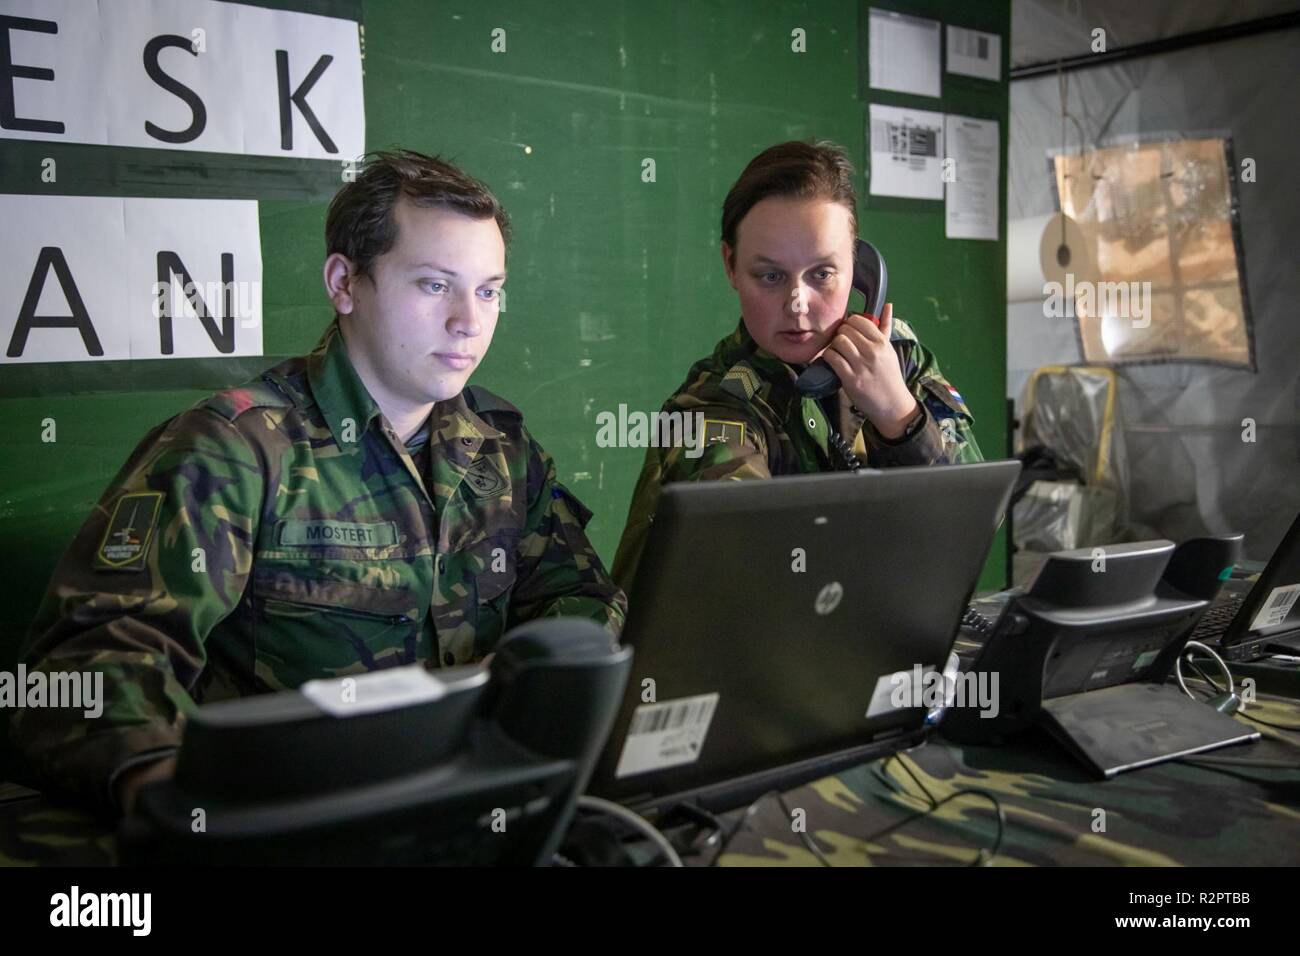 The Soldiers In The Help Desk Can Assist The Italian Soldiers Day